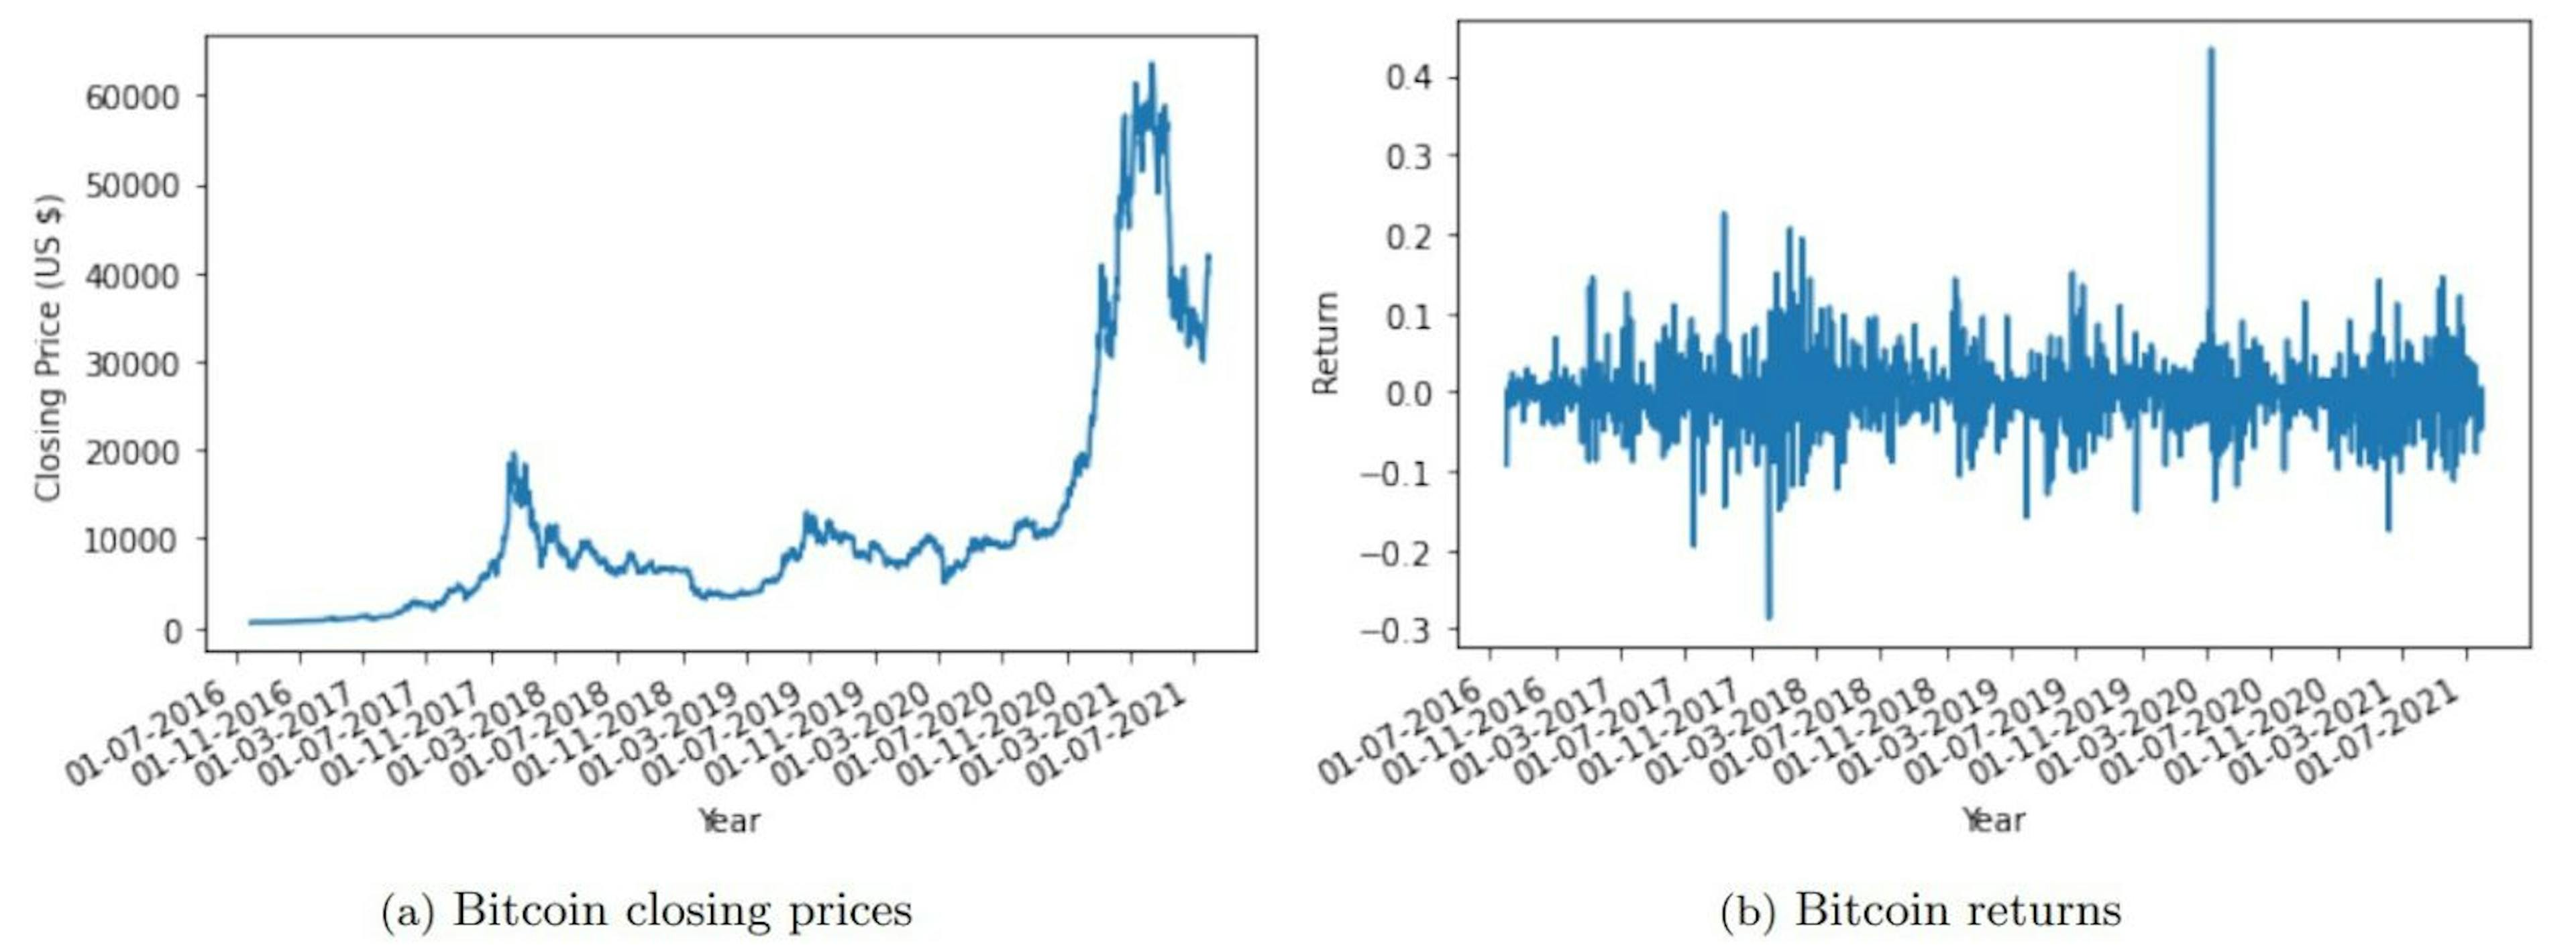 Figure 1: Bitcoin daily closing prices and log returns during 2016-2021